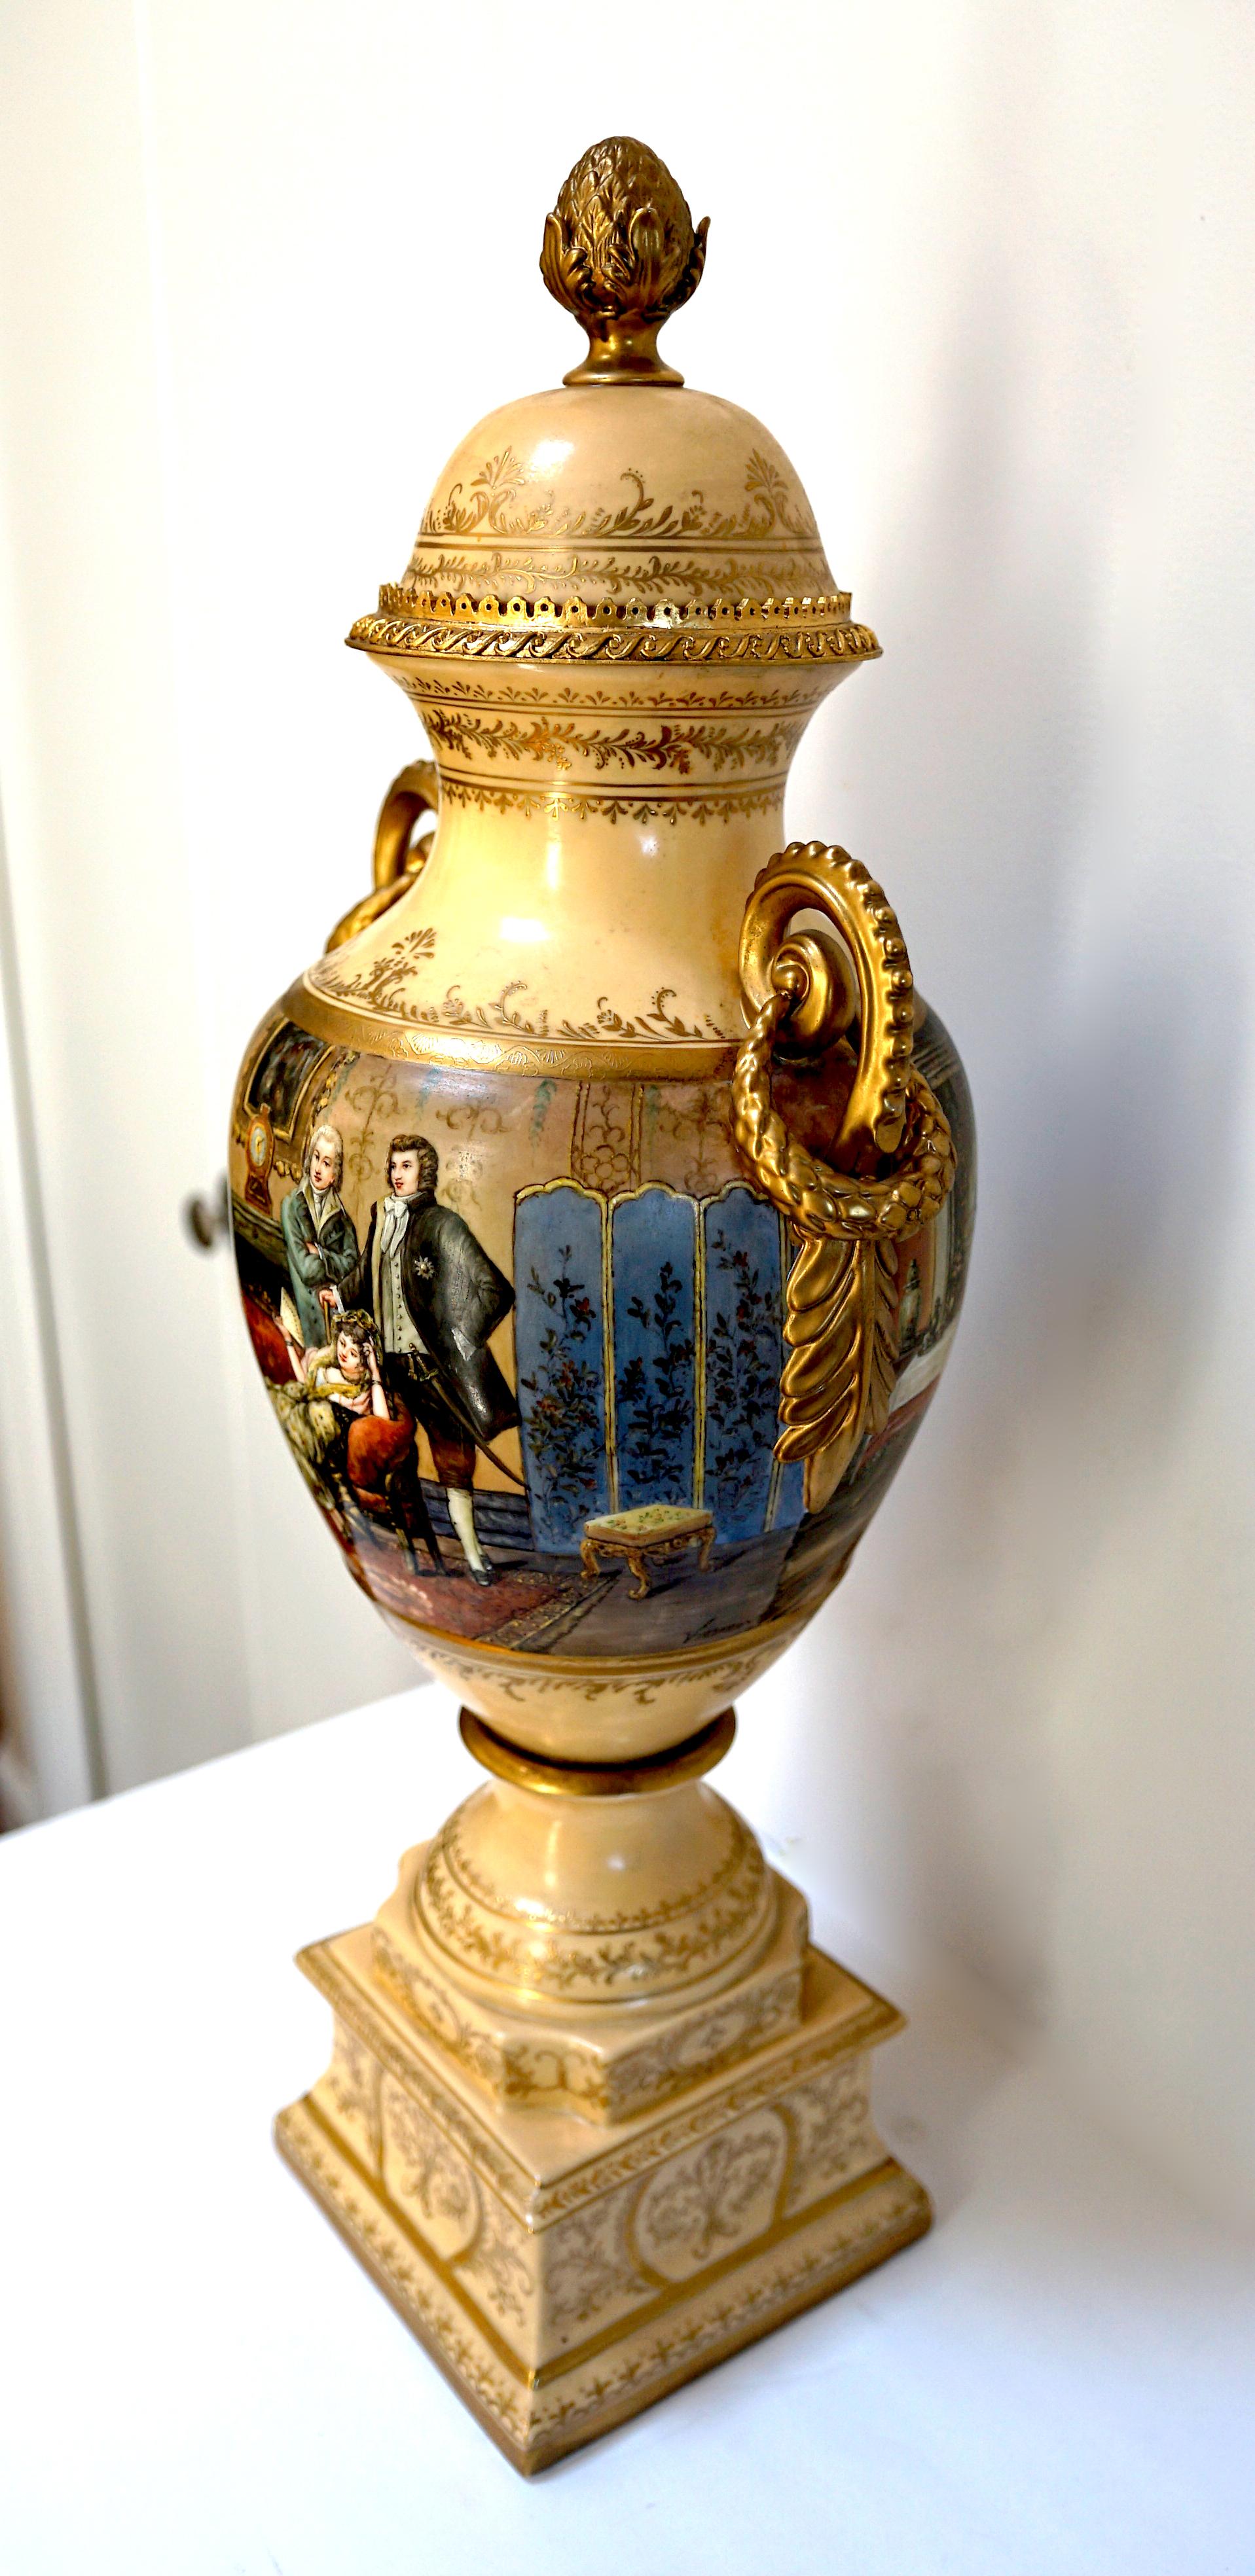 The porcelain factories of Dresden are renowned for this type of decorative piece and this monumental vase would have been at least one of a pair or part of a three or five piece mantle garniture at some point in its history. Alone, it is stunning.